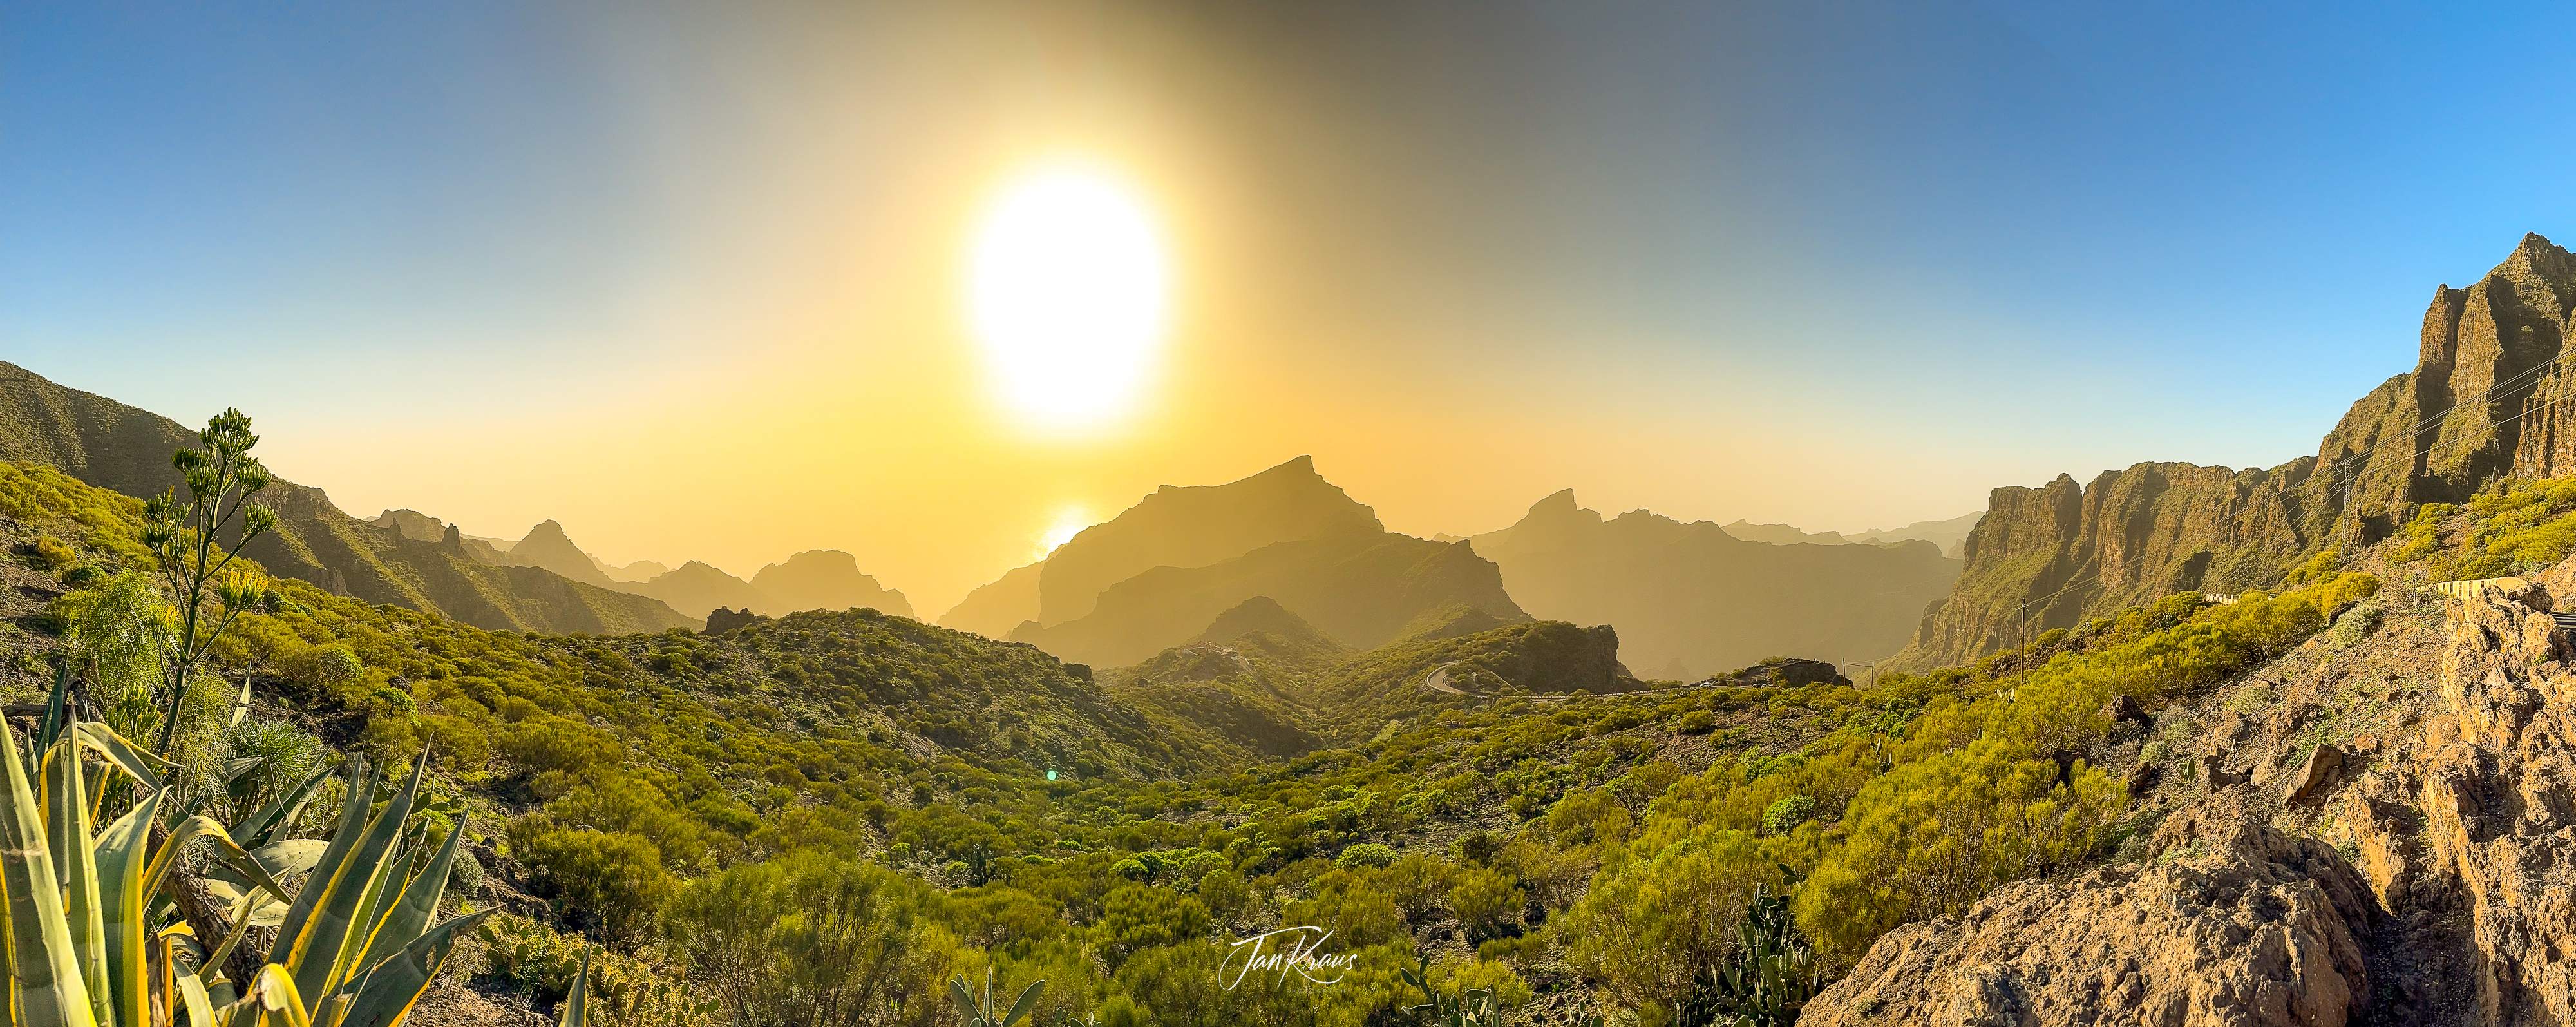 A panoramic view from Mirador de Cherfe, Tenerife, Canary Islands, Spain